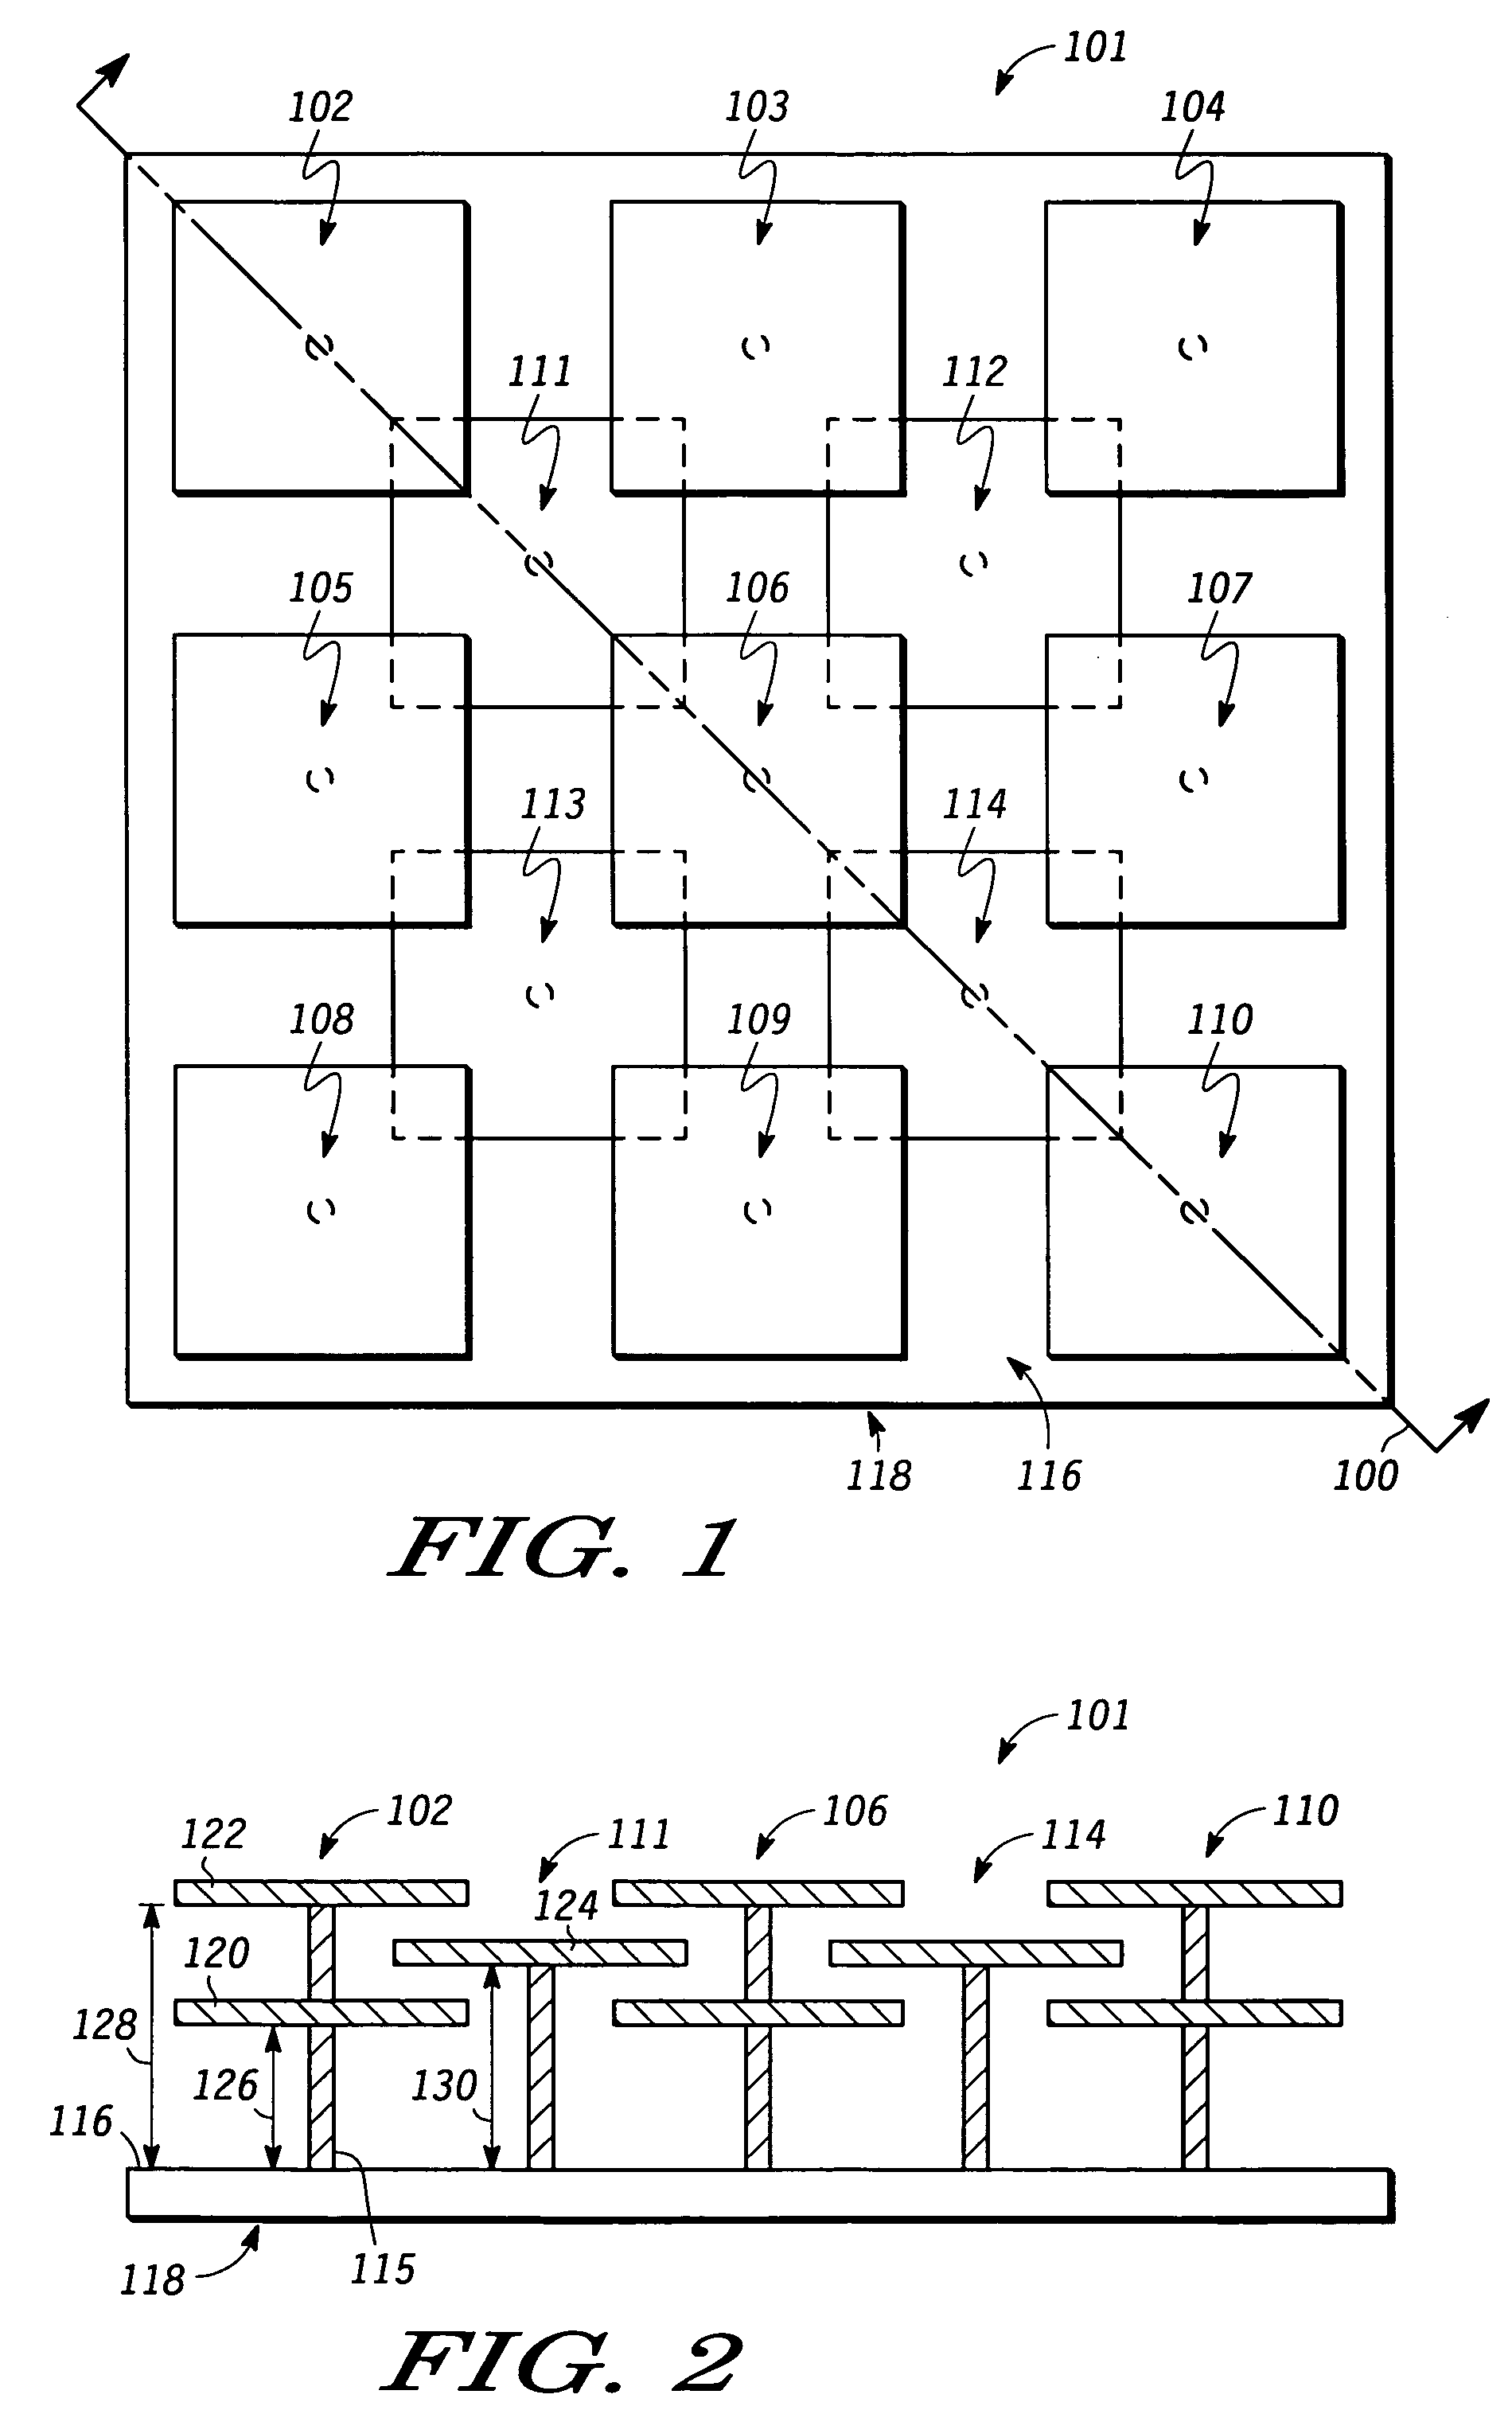 Frequency selective high impedance surface